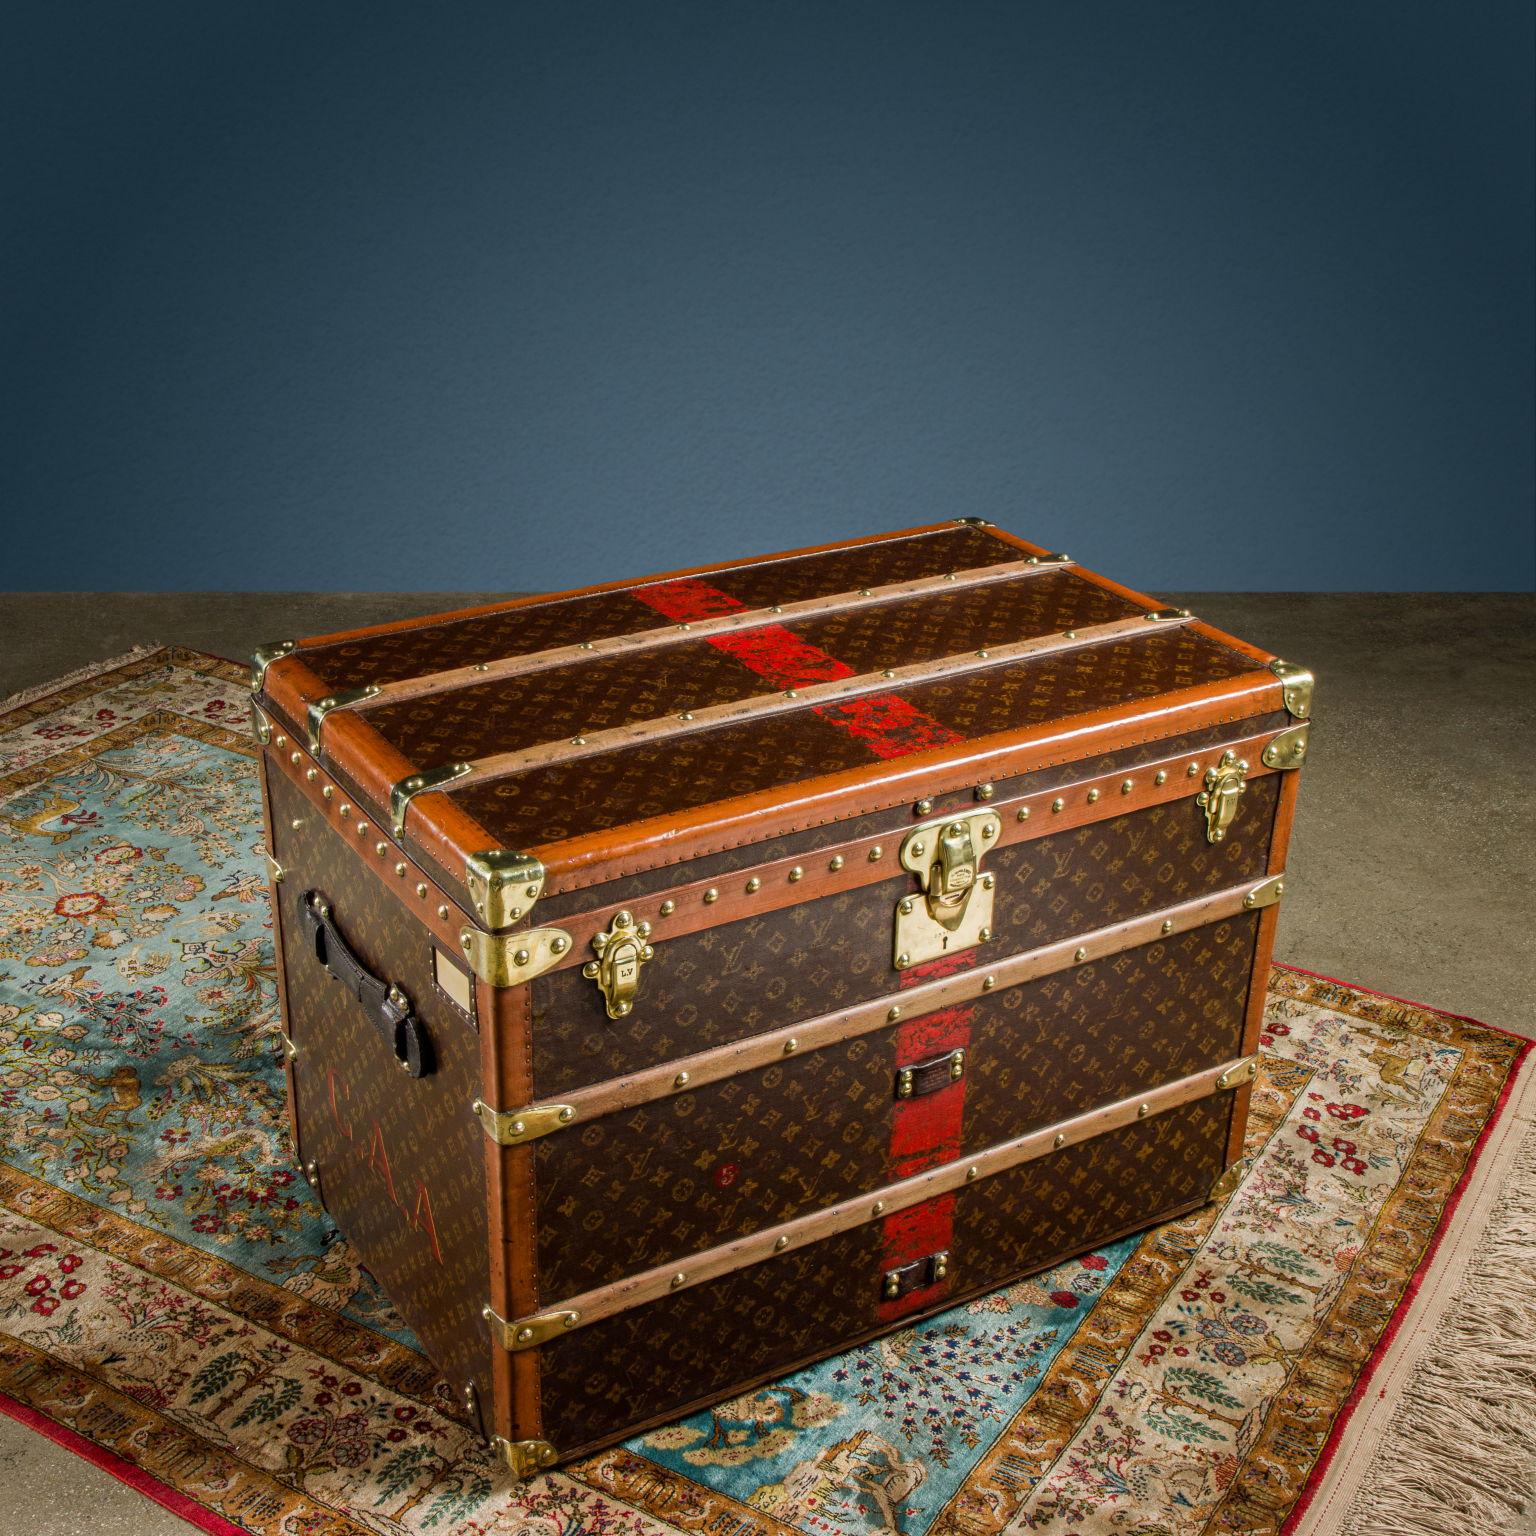 Louis Vuitton trunk datable to the second decade of the twentieth century, restored and brought back to its original condition. It is a Malle à Chapeaux for women, that is a light, simple and practical trunk-hatbox, created to carry hats without